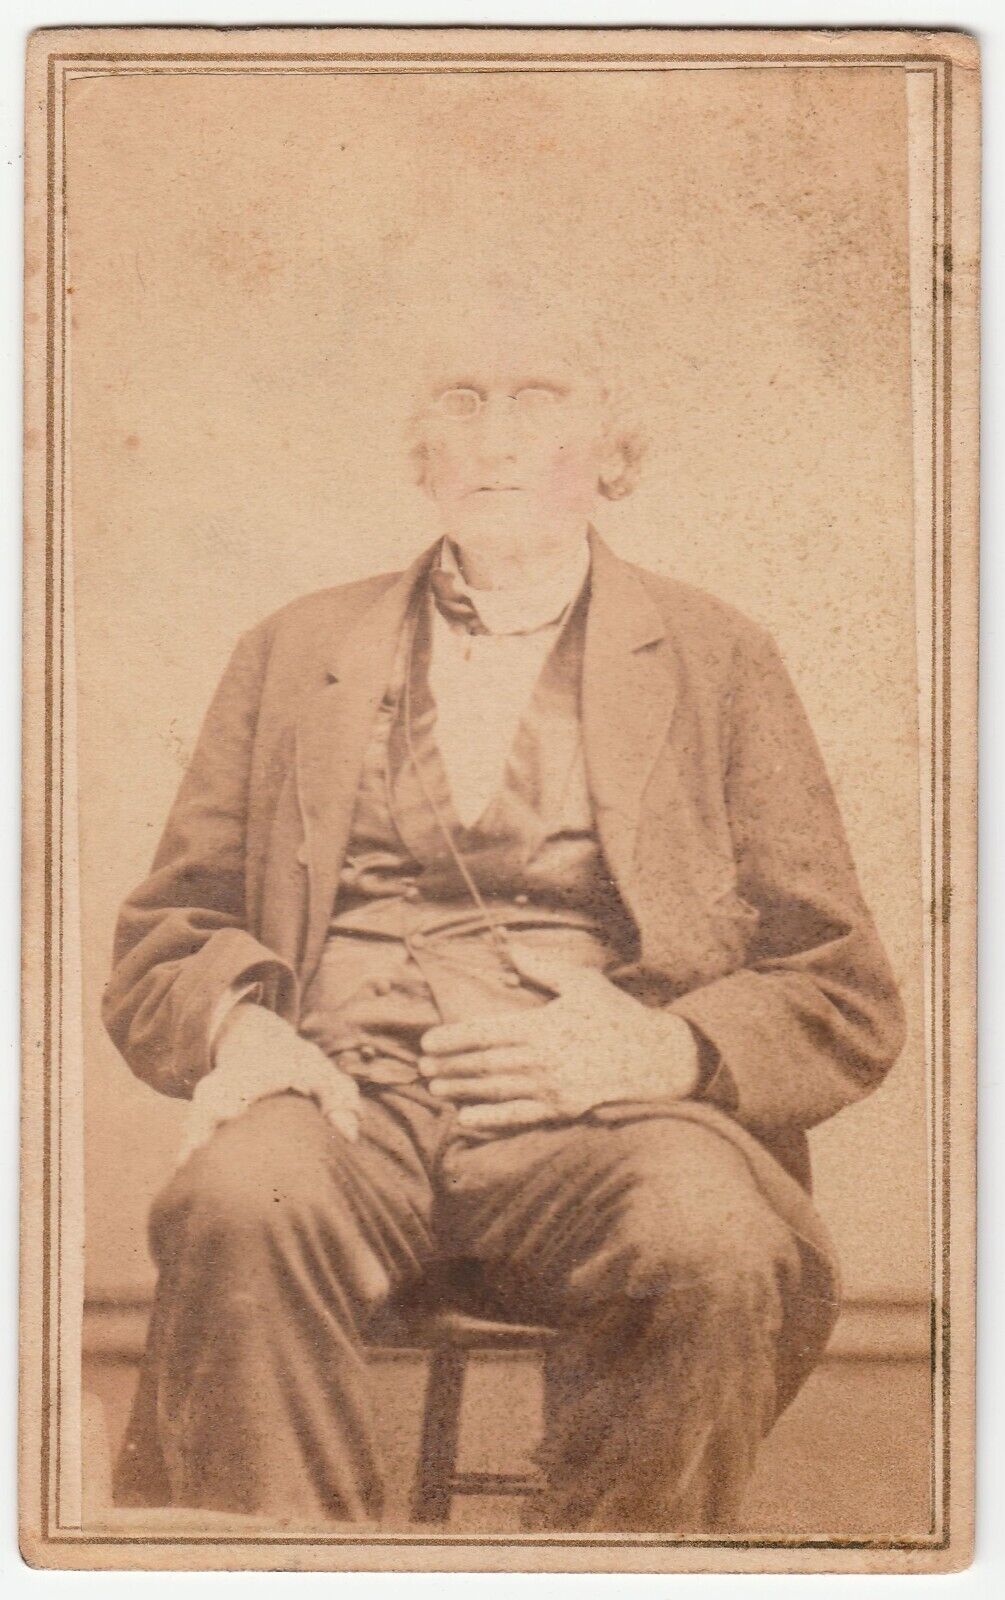 Original 1860's CDV Cabinet Card of Elderly Man in Spectacles with Revenue Stamp